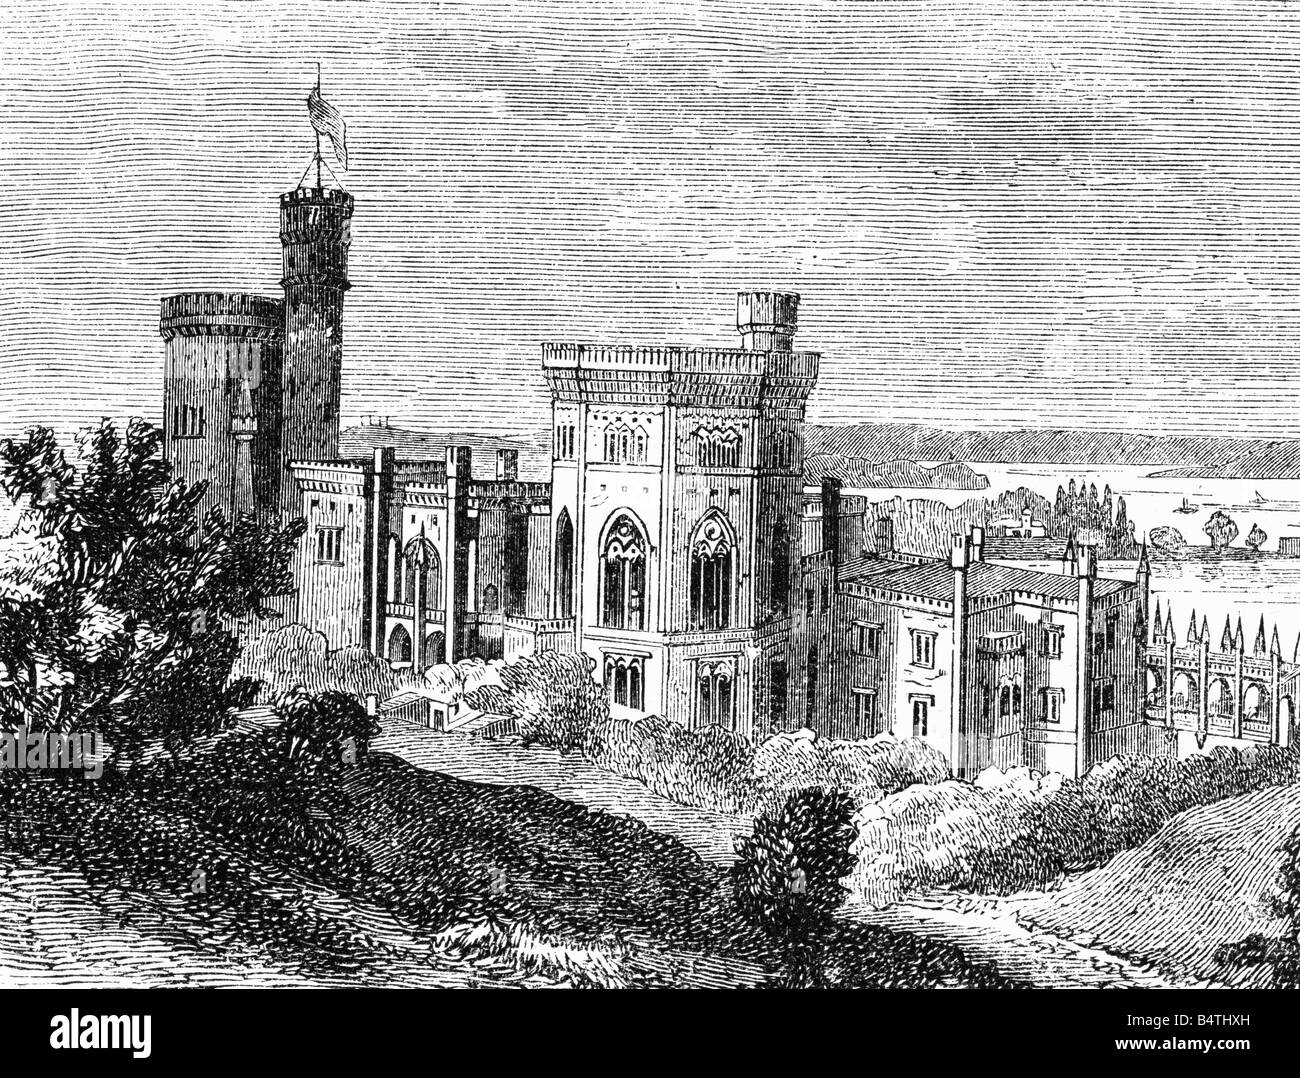 geography / travel, Germany, Potsdam, Babelsberg Castle, built 1835 - 1849 by Karl Friedrich Schinkel, Ludwig Persius and Johann Heinrich Strack, exterior view, wood engraving, circa 1870, Stock Photo